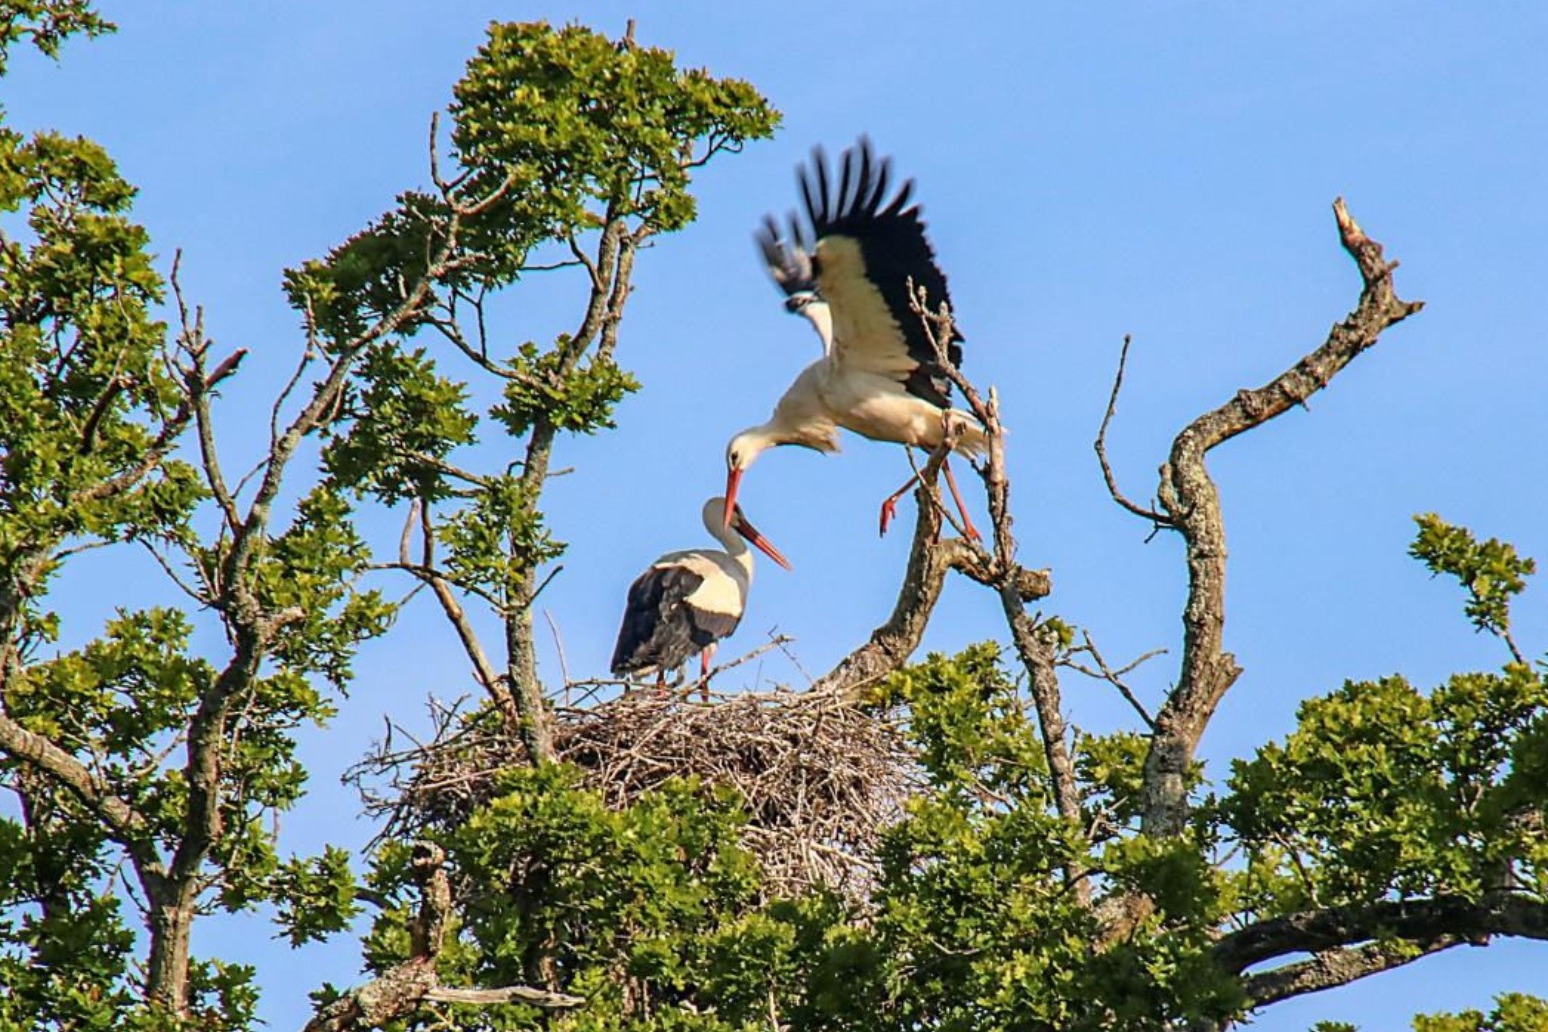 Wild white storks hatch in UK for first time in centuries 